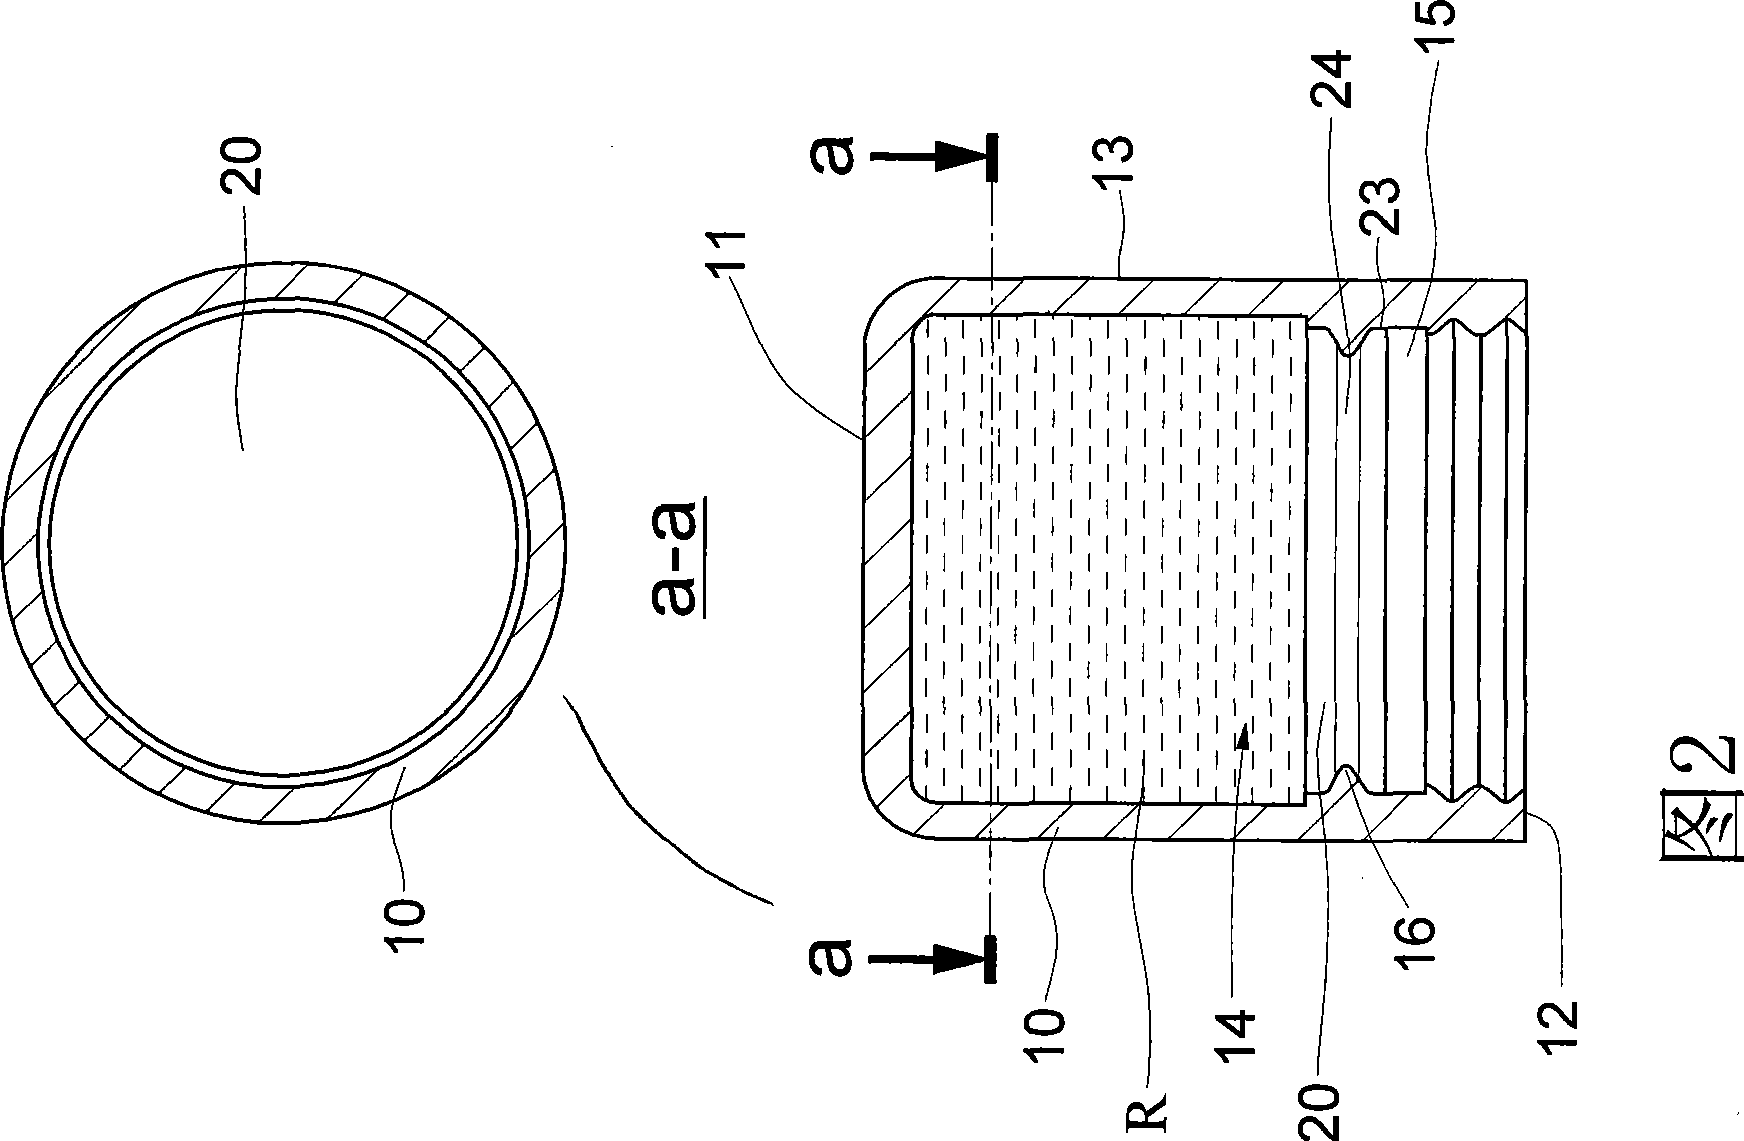 Structure capable of preventing liquid substance leakage in bottle cap